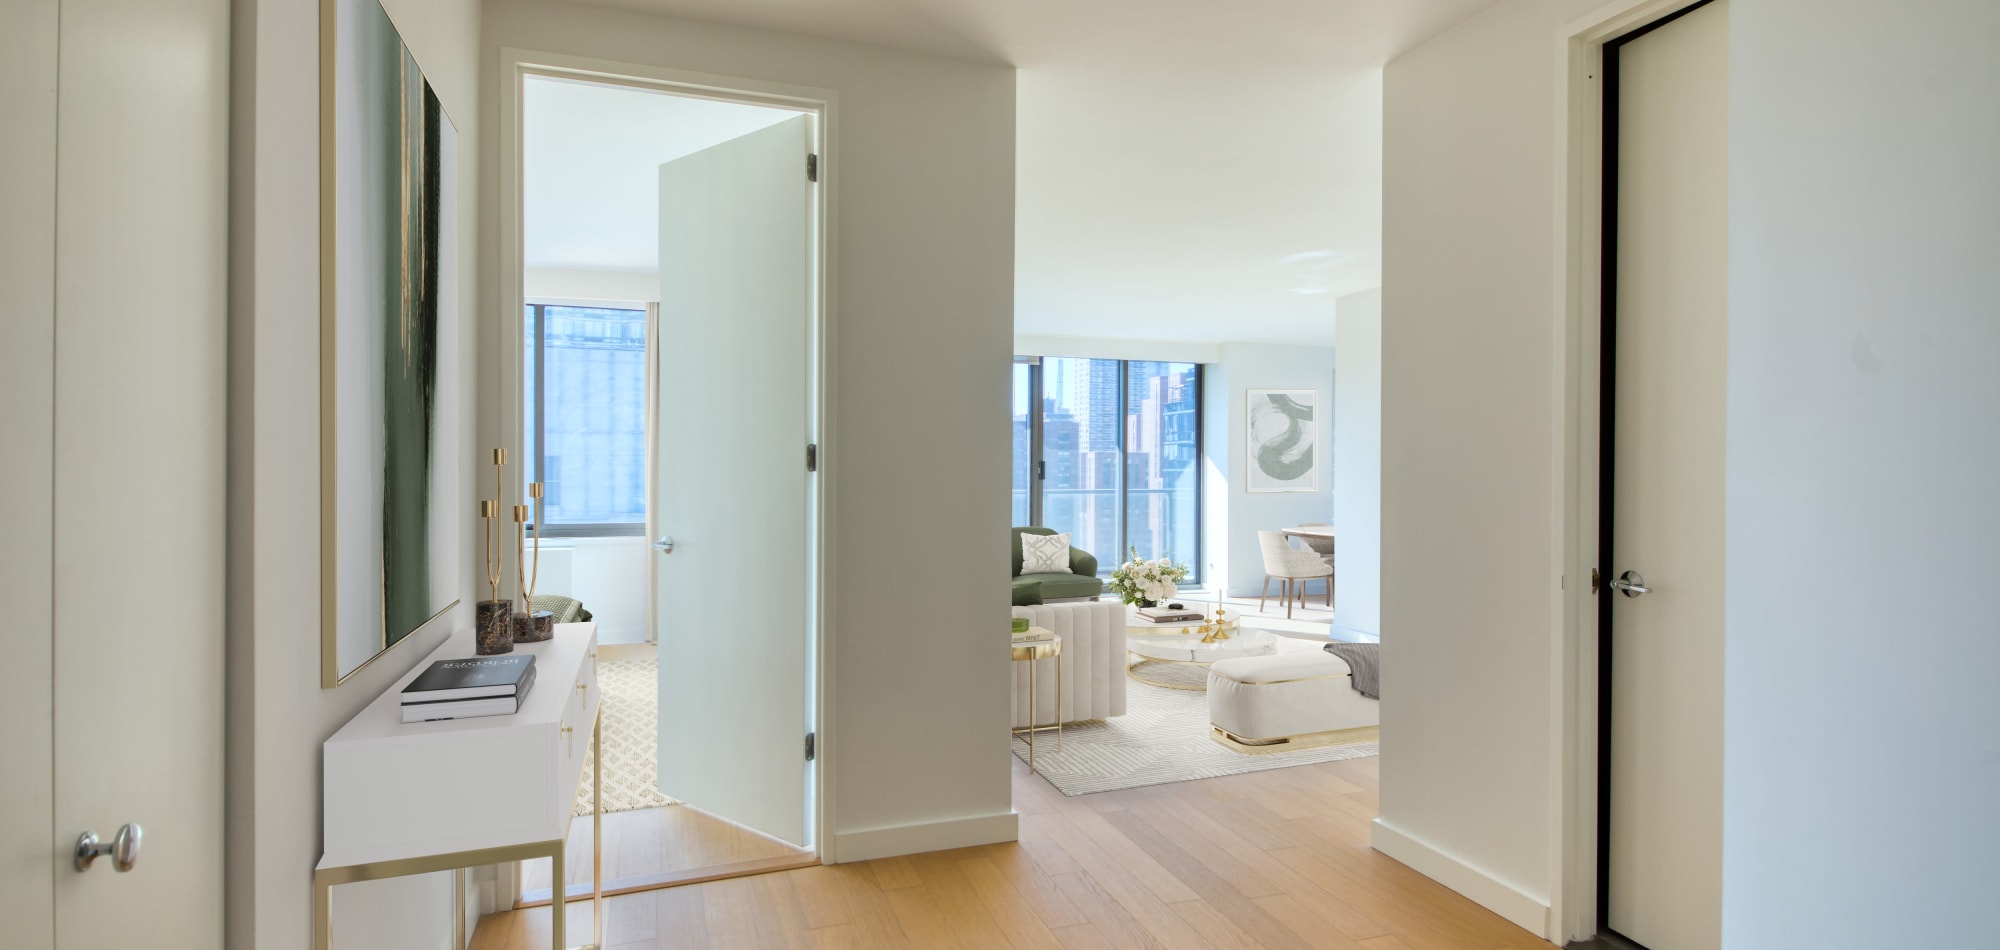 Spacious floor plans and natural lighting at 301 E 94th Street in New York, New York